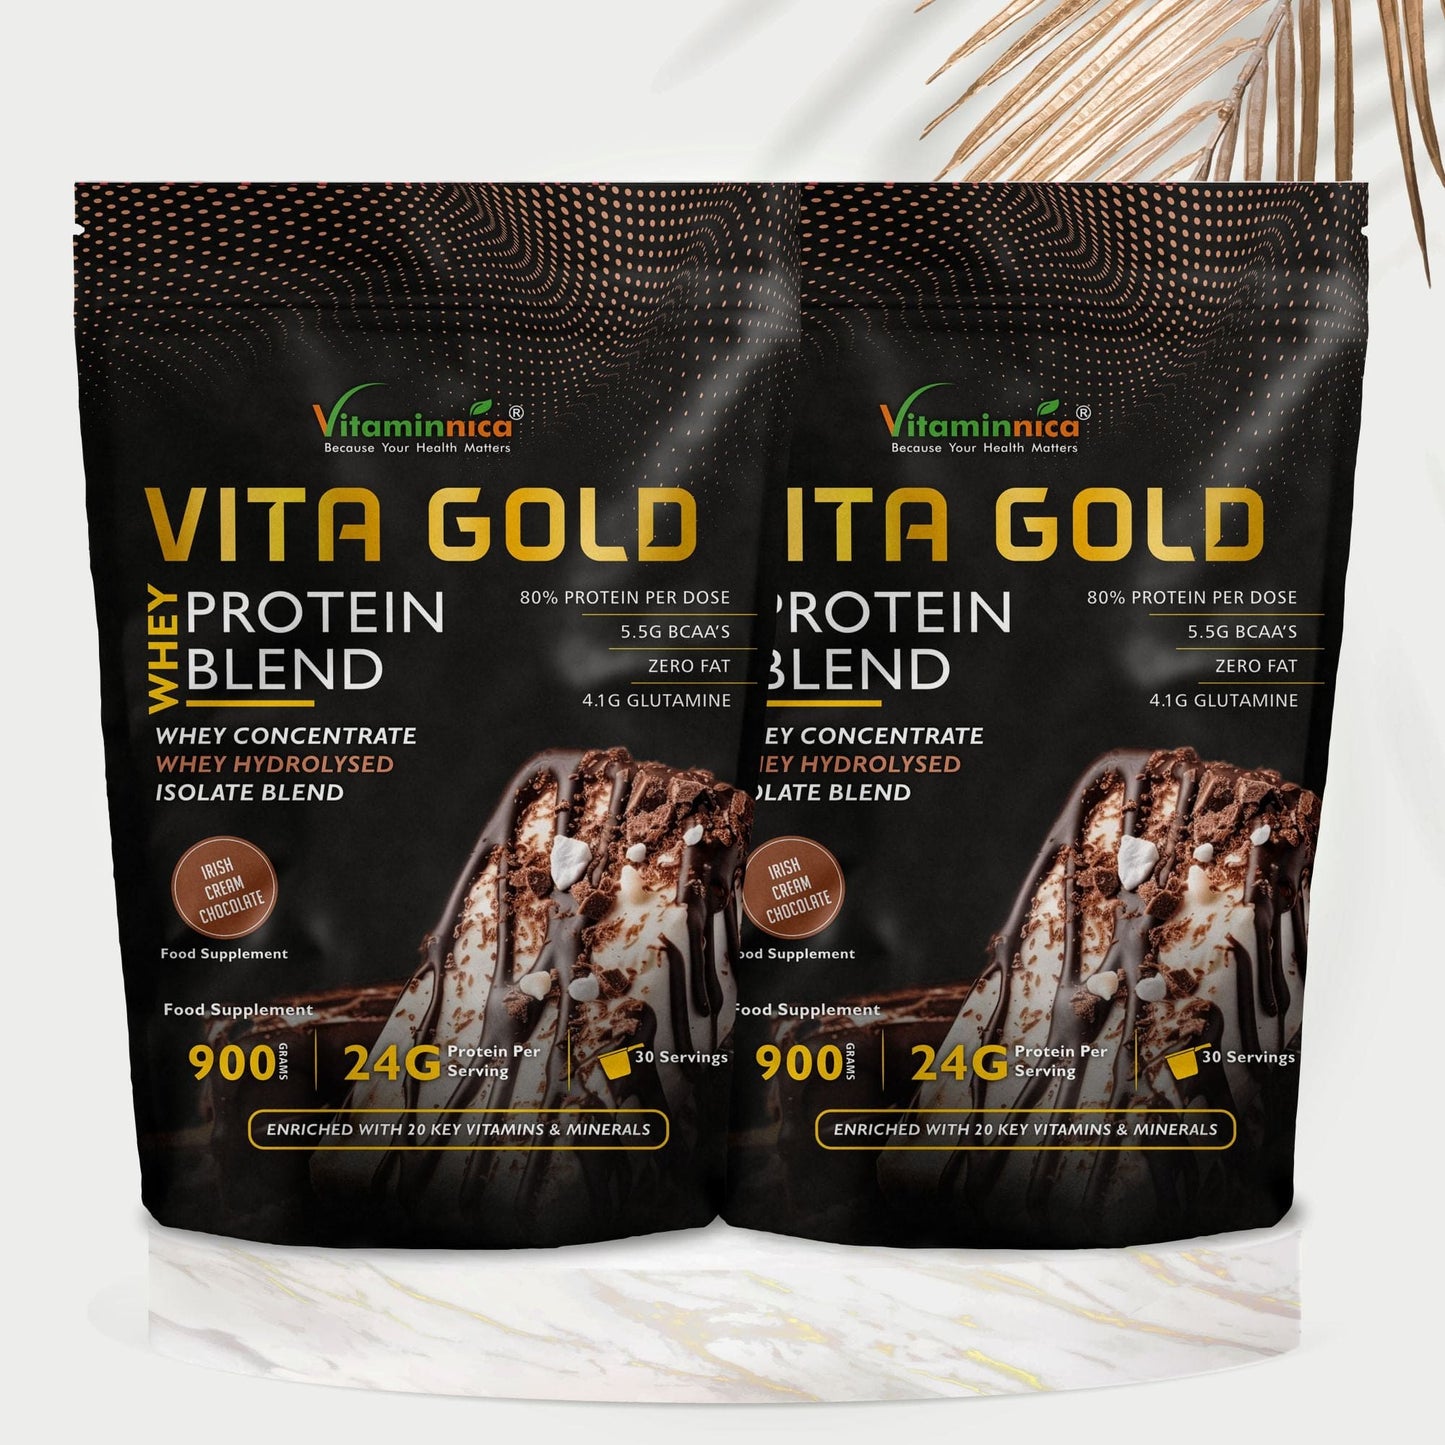 Vitaminnica Vita Gold Whey Protein Blend- Irish Cholocate Flavour | Whey Concentrate, Hydrolysed, Isolate Blend | 900gms - 30 Servings - Vitaminnica Healthcare